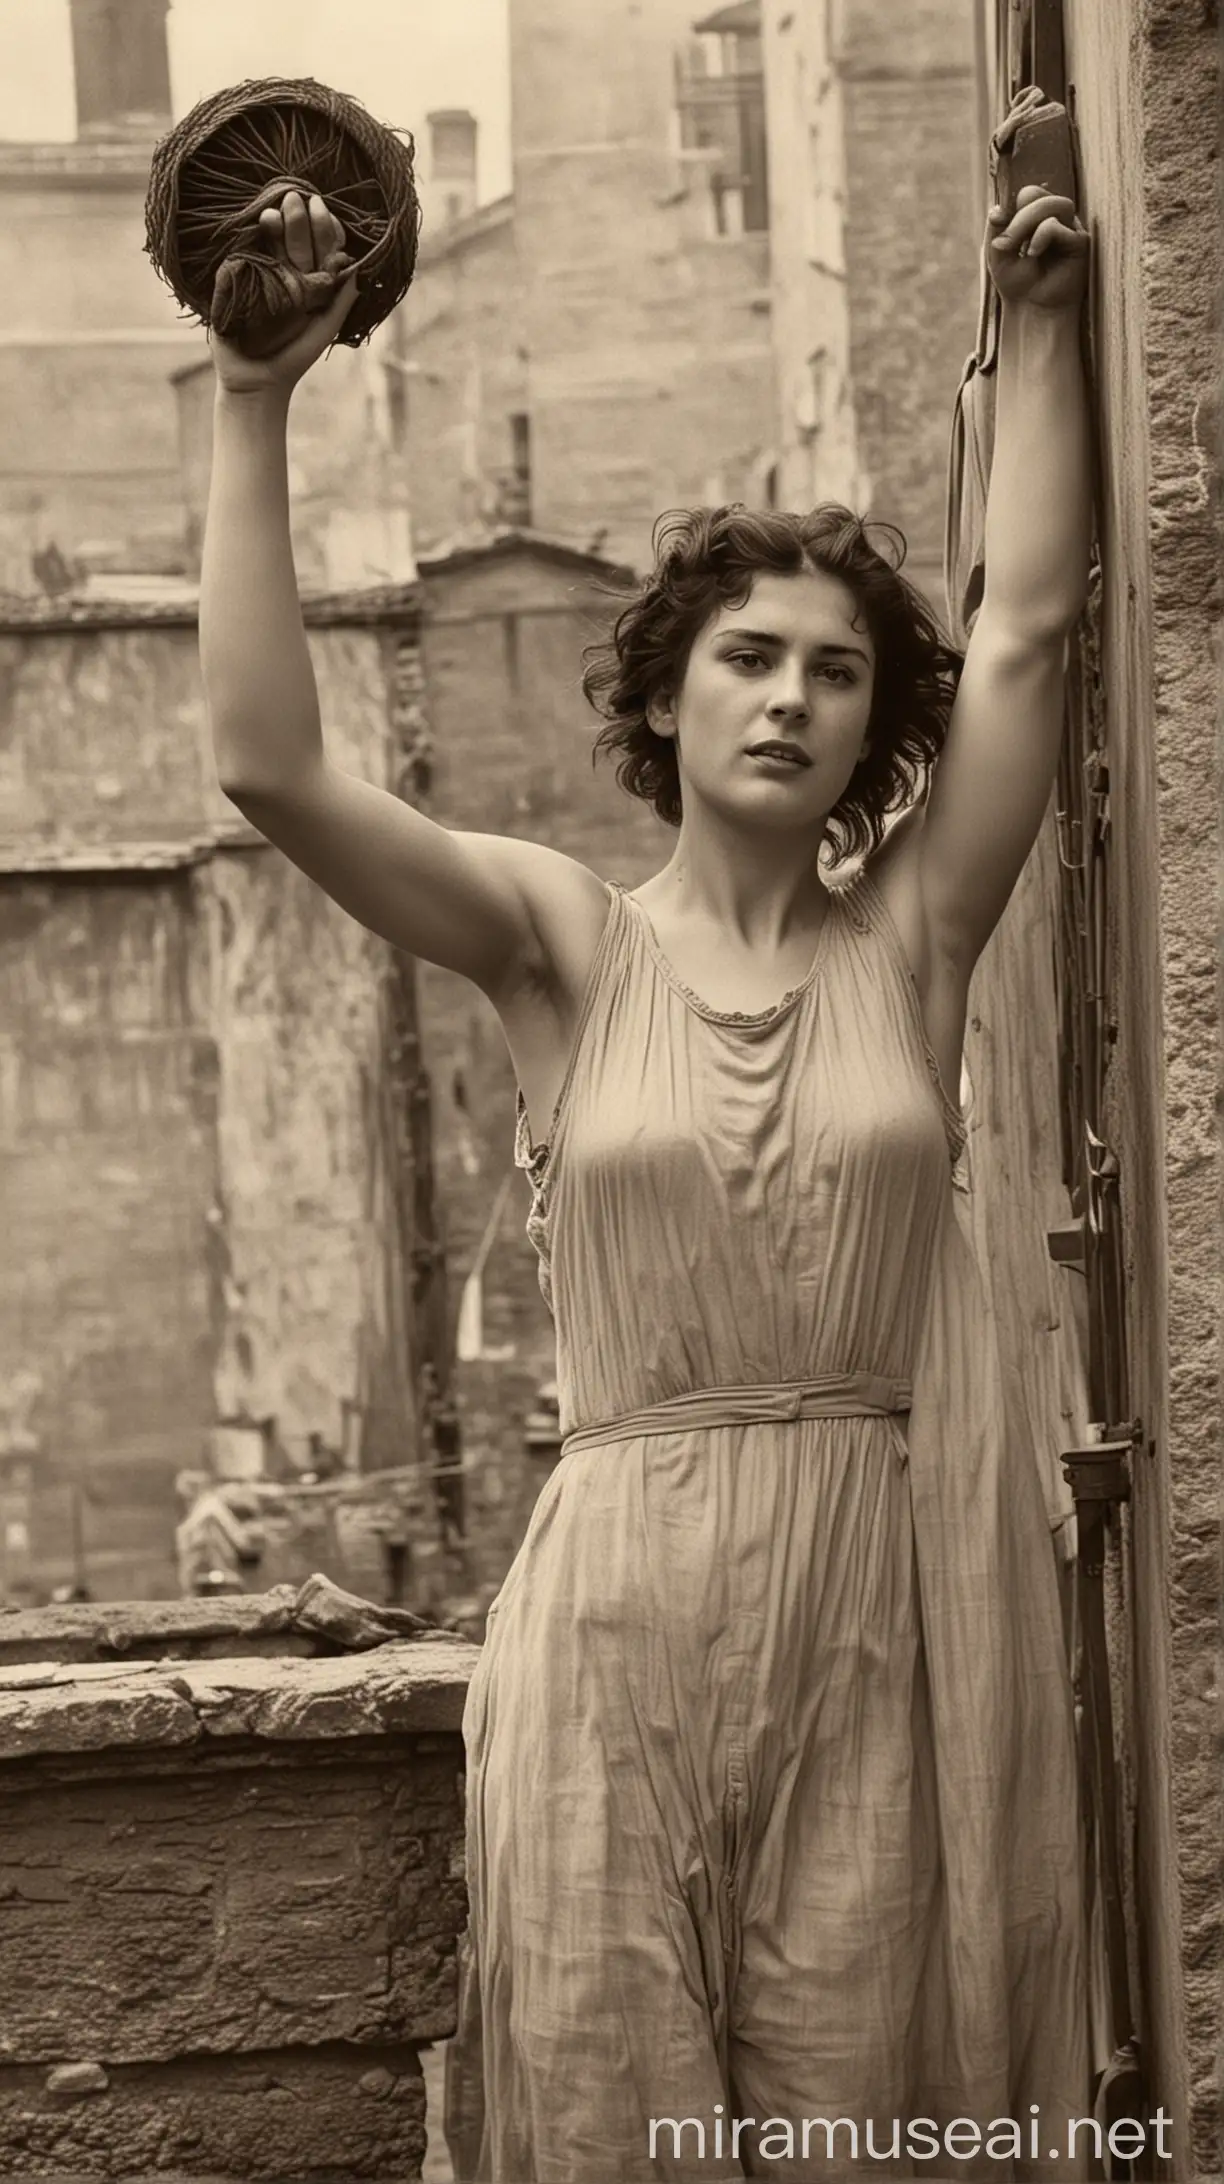 1920s Woman in Rome Doing Chores with Unshaven Underarms